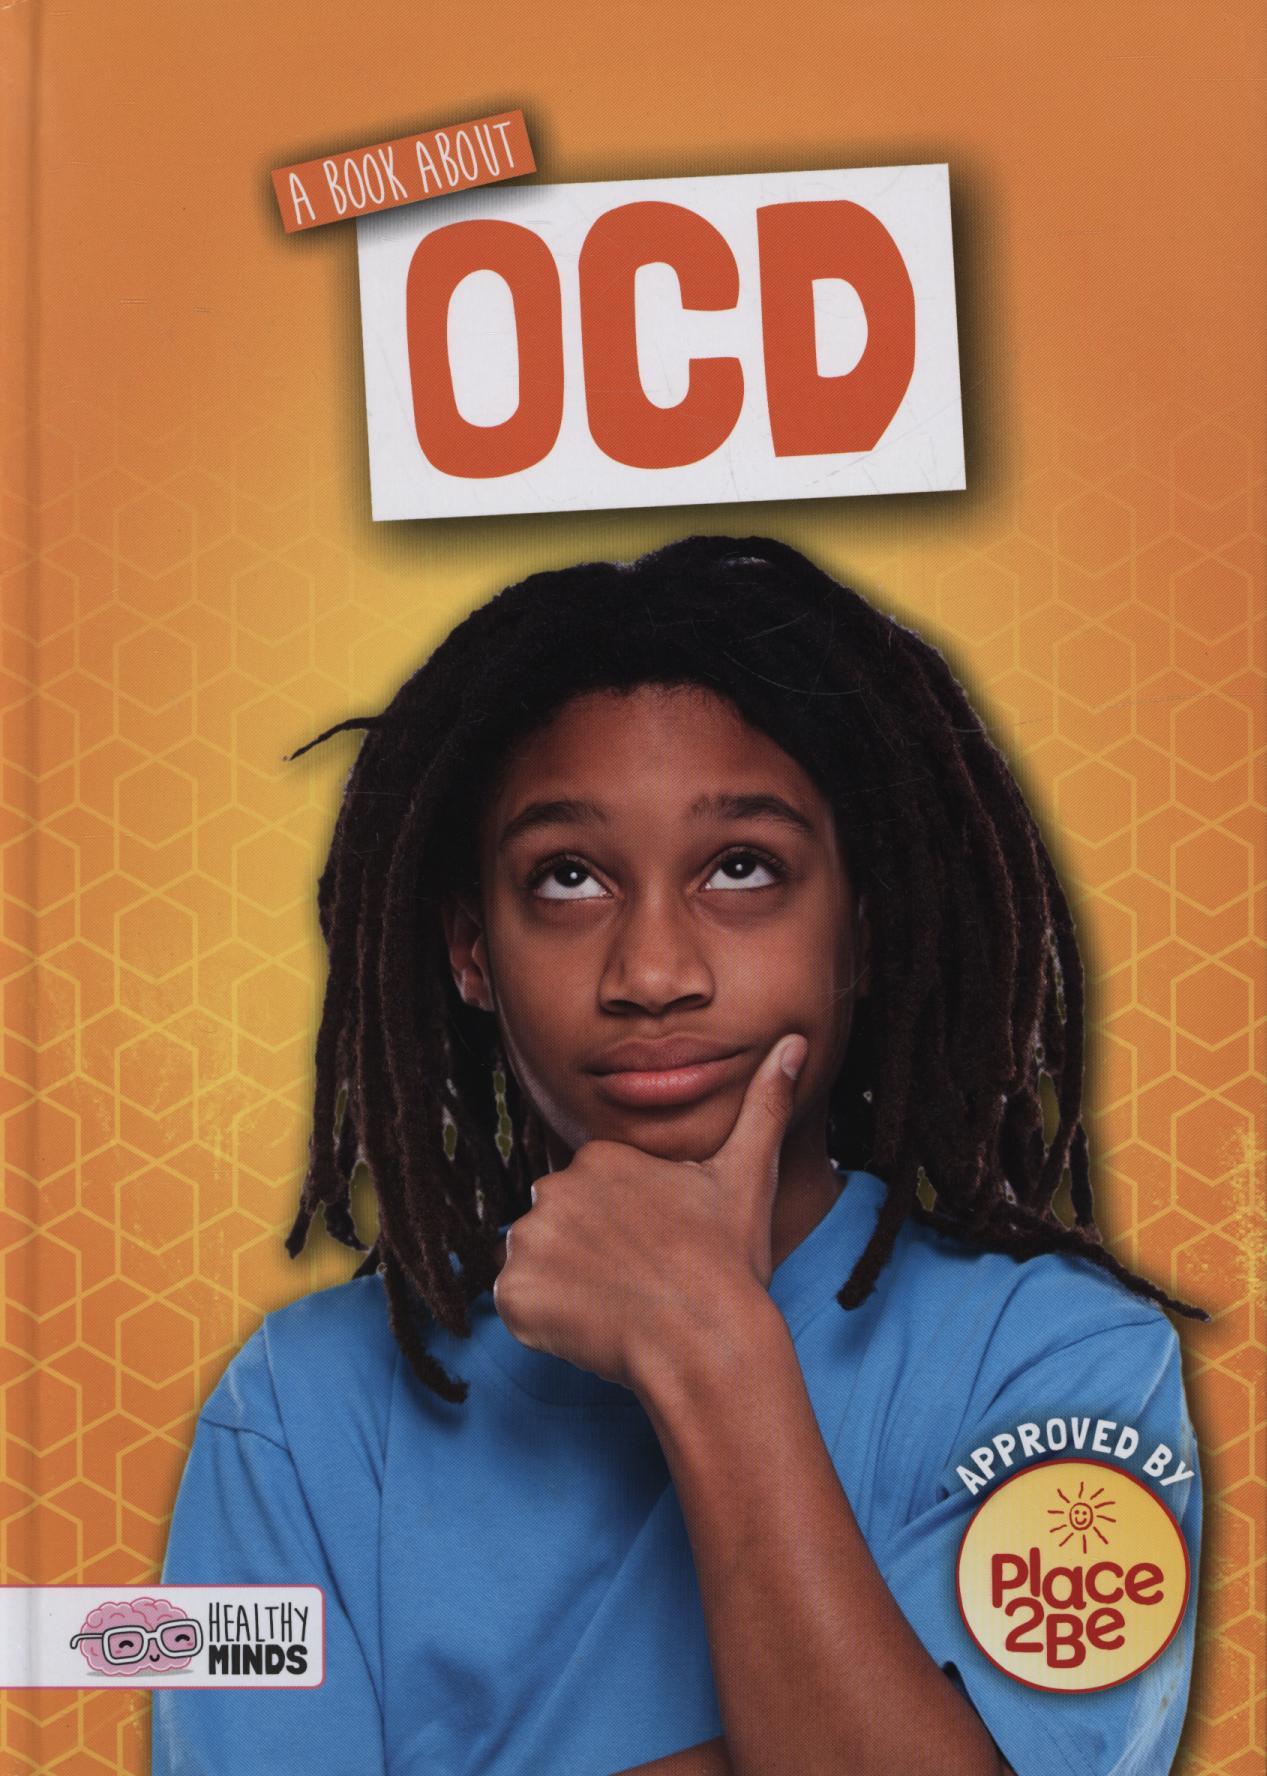 Book About OCD